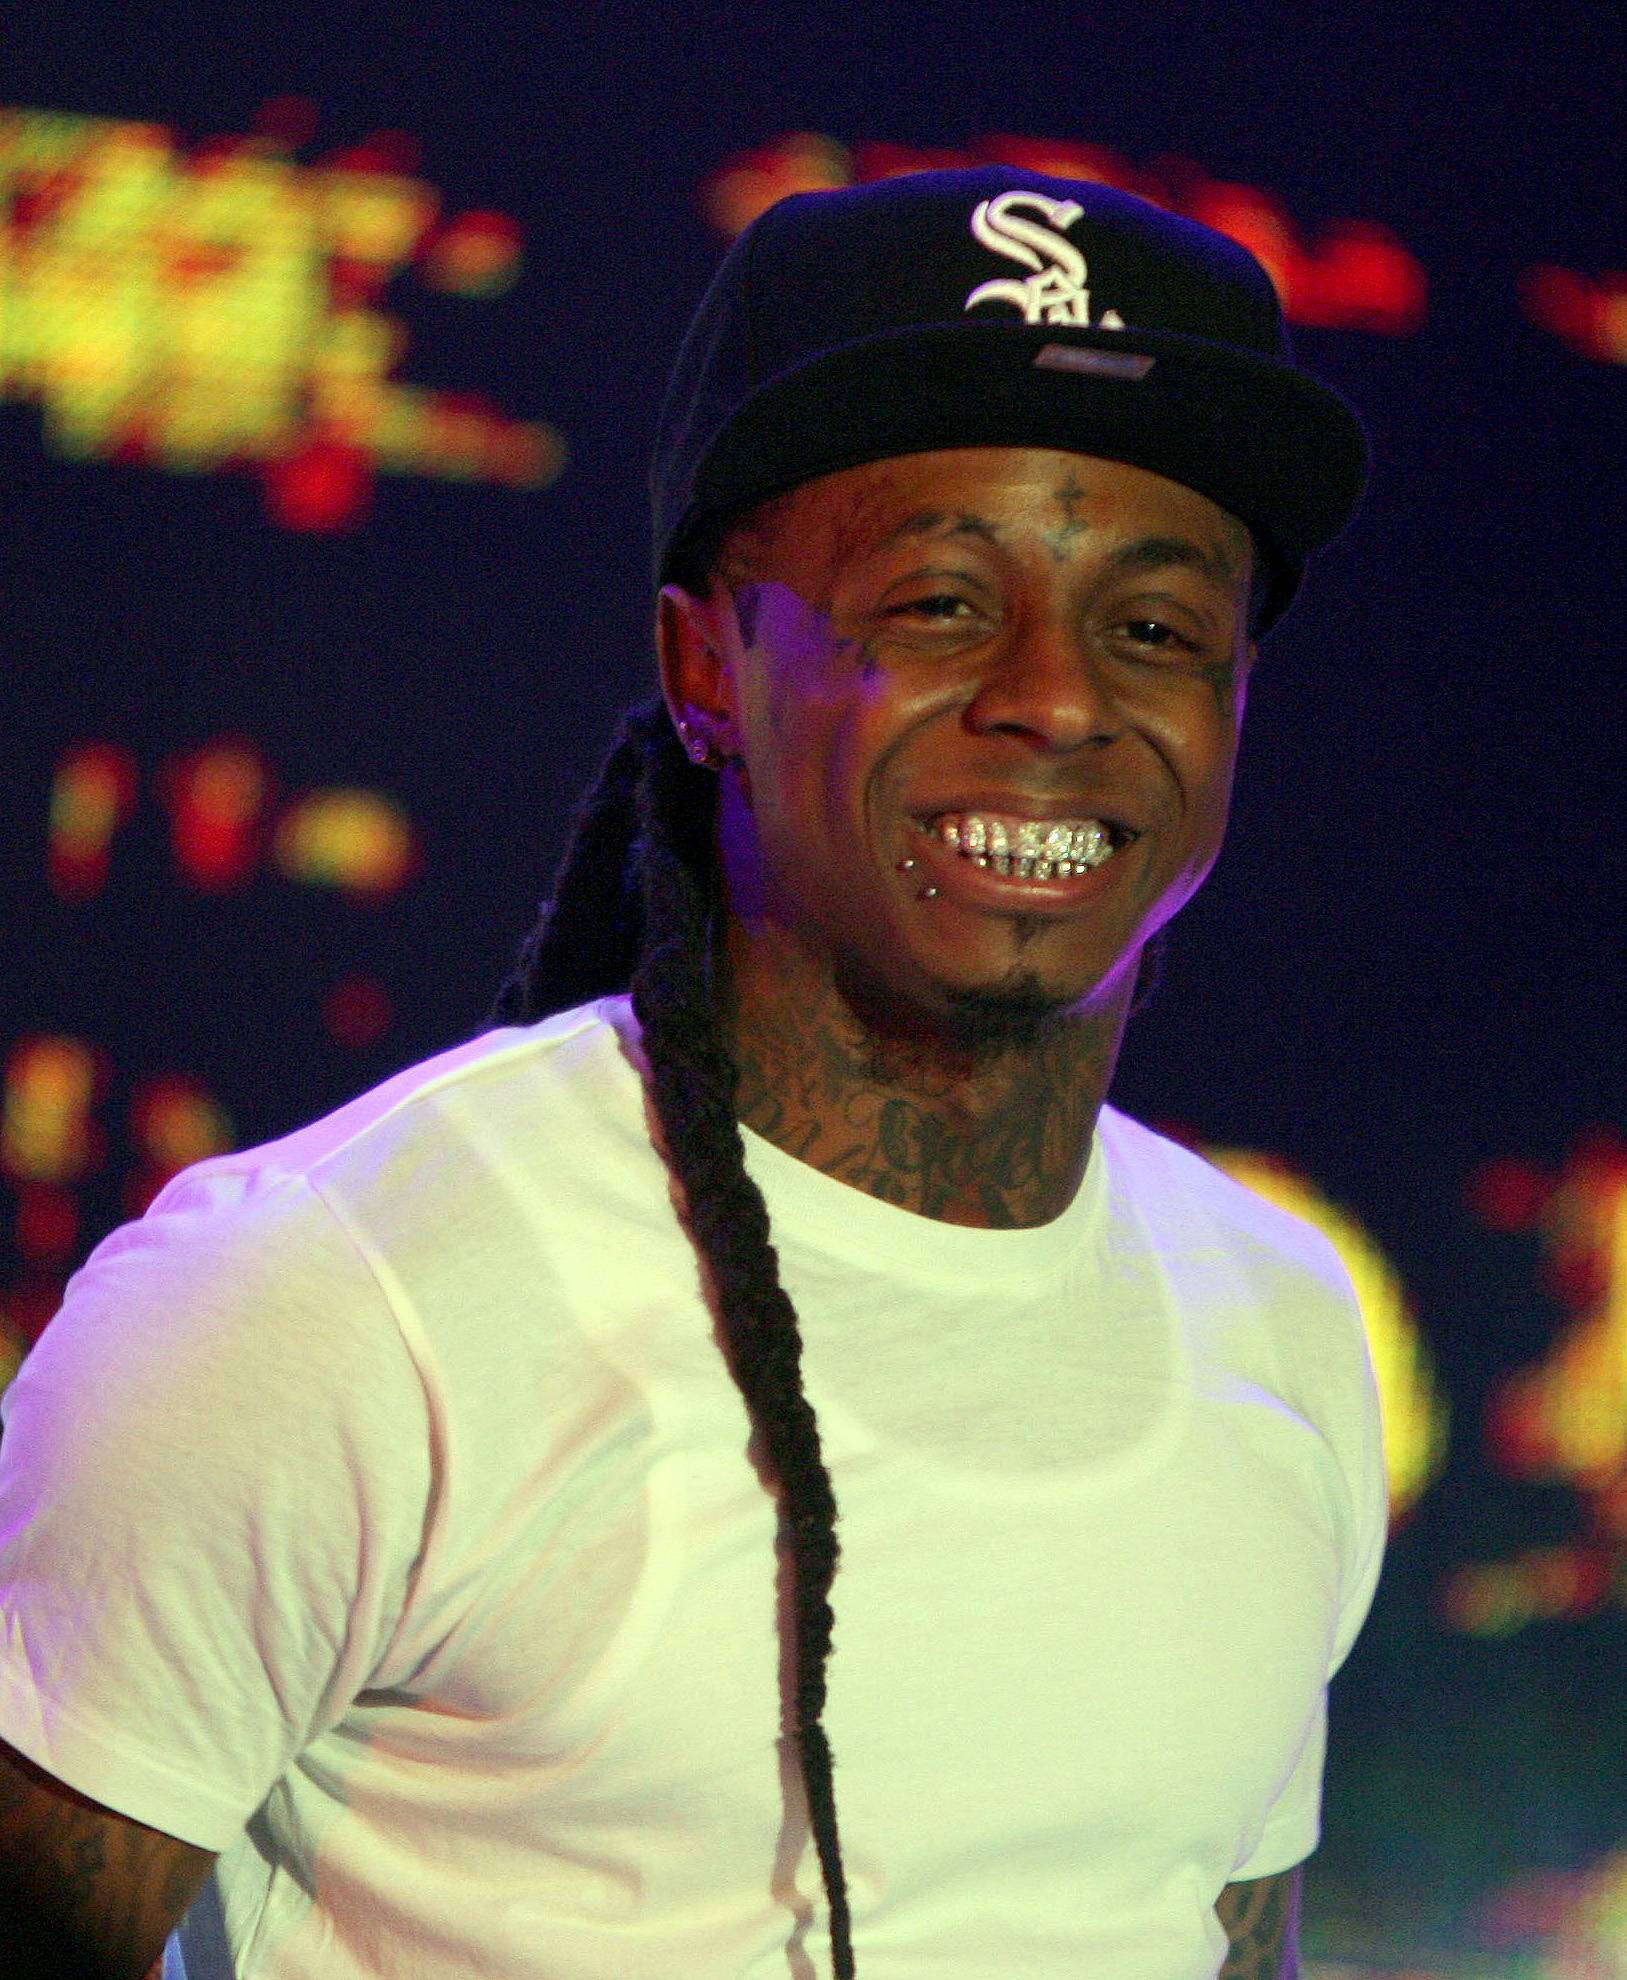 Lil’ Wayne to fans outside his home&nbsp; - &quot;Do me a favor, get the f*ck from out this neighborhood or get your head knocked the f*ck off, do that…”(Photo: PNP/WENN.com)